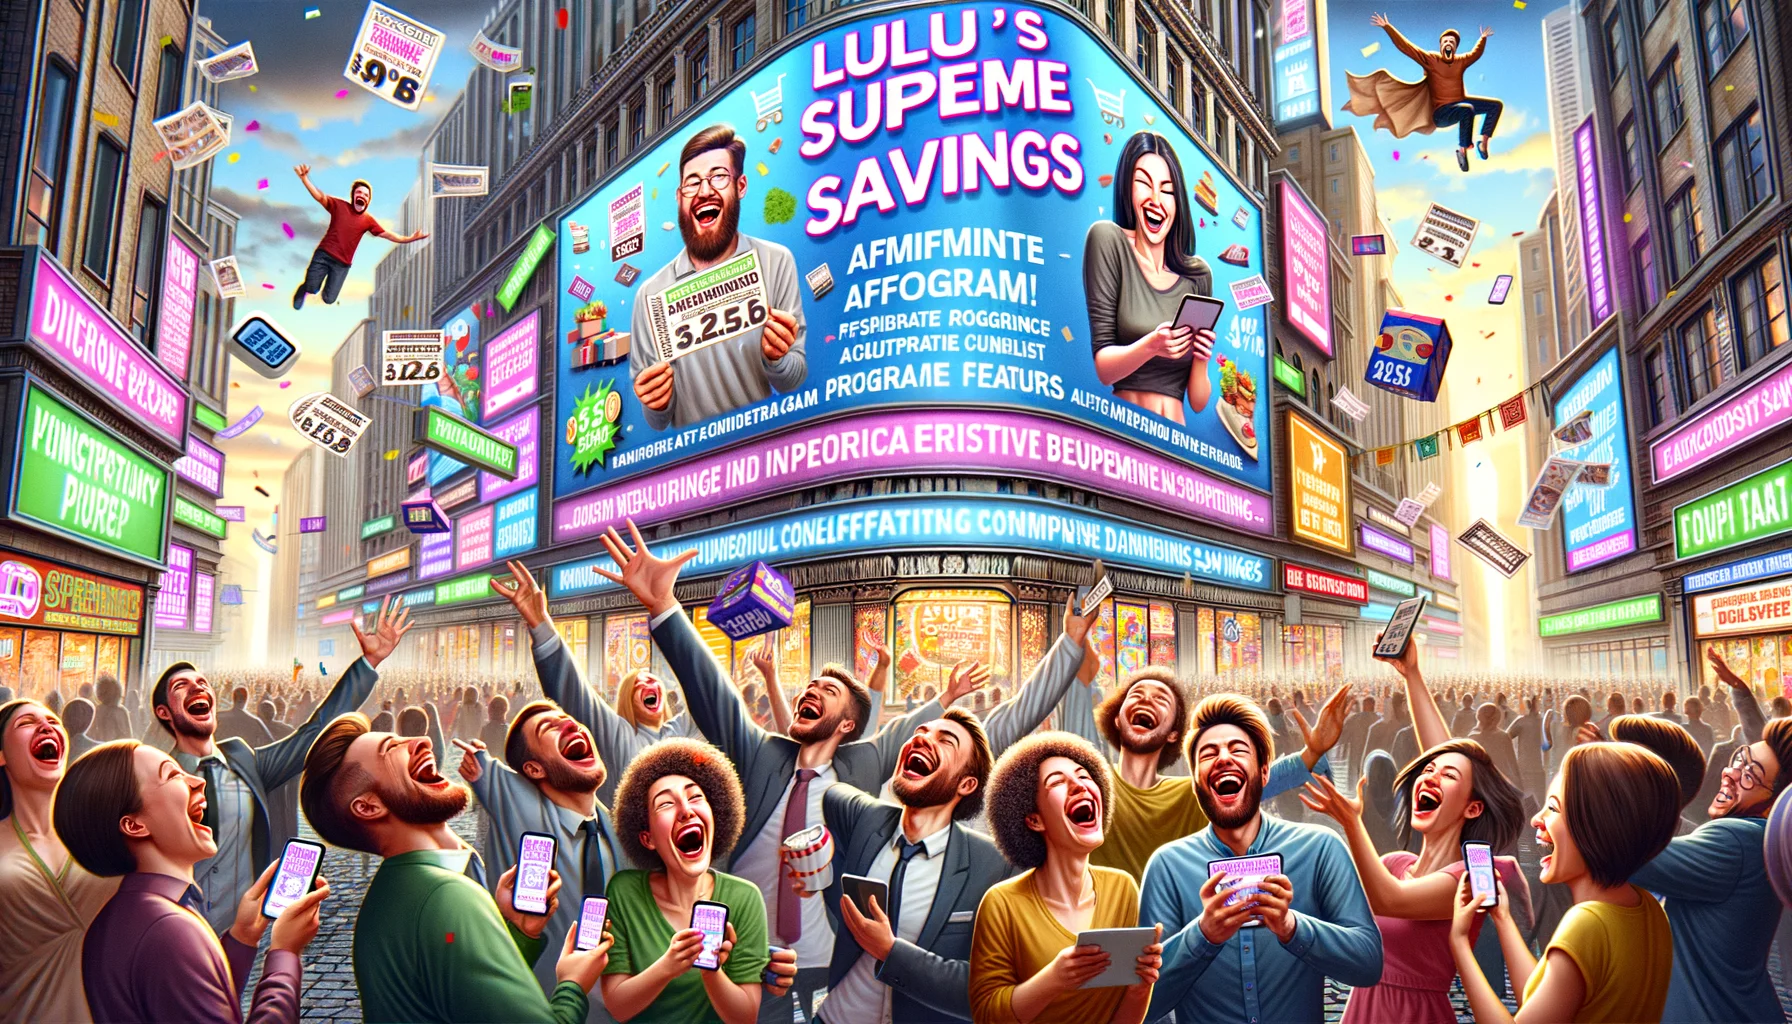 Design a humorous and realistic image that highlights a fictional affiliate program called 'Lulu's Supreme Savings'. The scene is a bustling city street with fascinating commerce. People of various descents and gender are laughing heartily while enthusiastically engaging with the program. They can be seen holding gadgets with text and images promoting various discounts and benefits. Random unconventional situations add to the humor- a man is spreading discount coupons like confetti, a woman is jumping in excitement holding her device high in the air. Cityscape includes large, colorful digital billboards showcasing comprehensive program features.